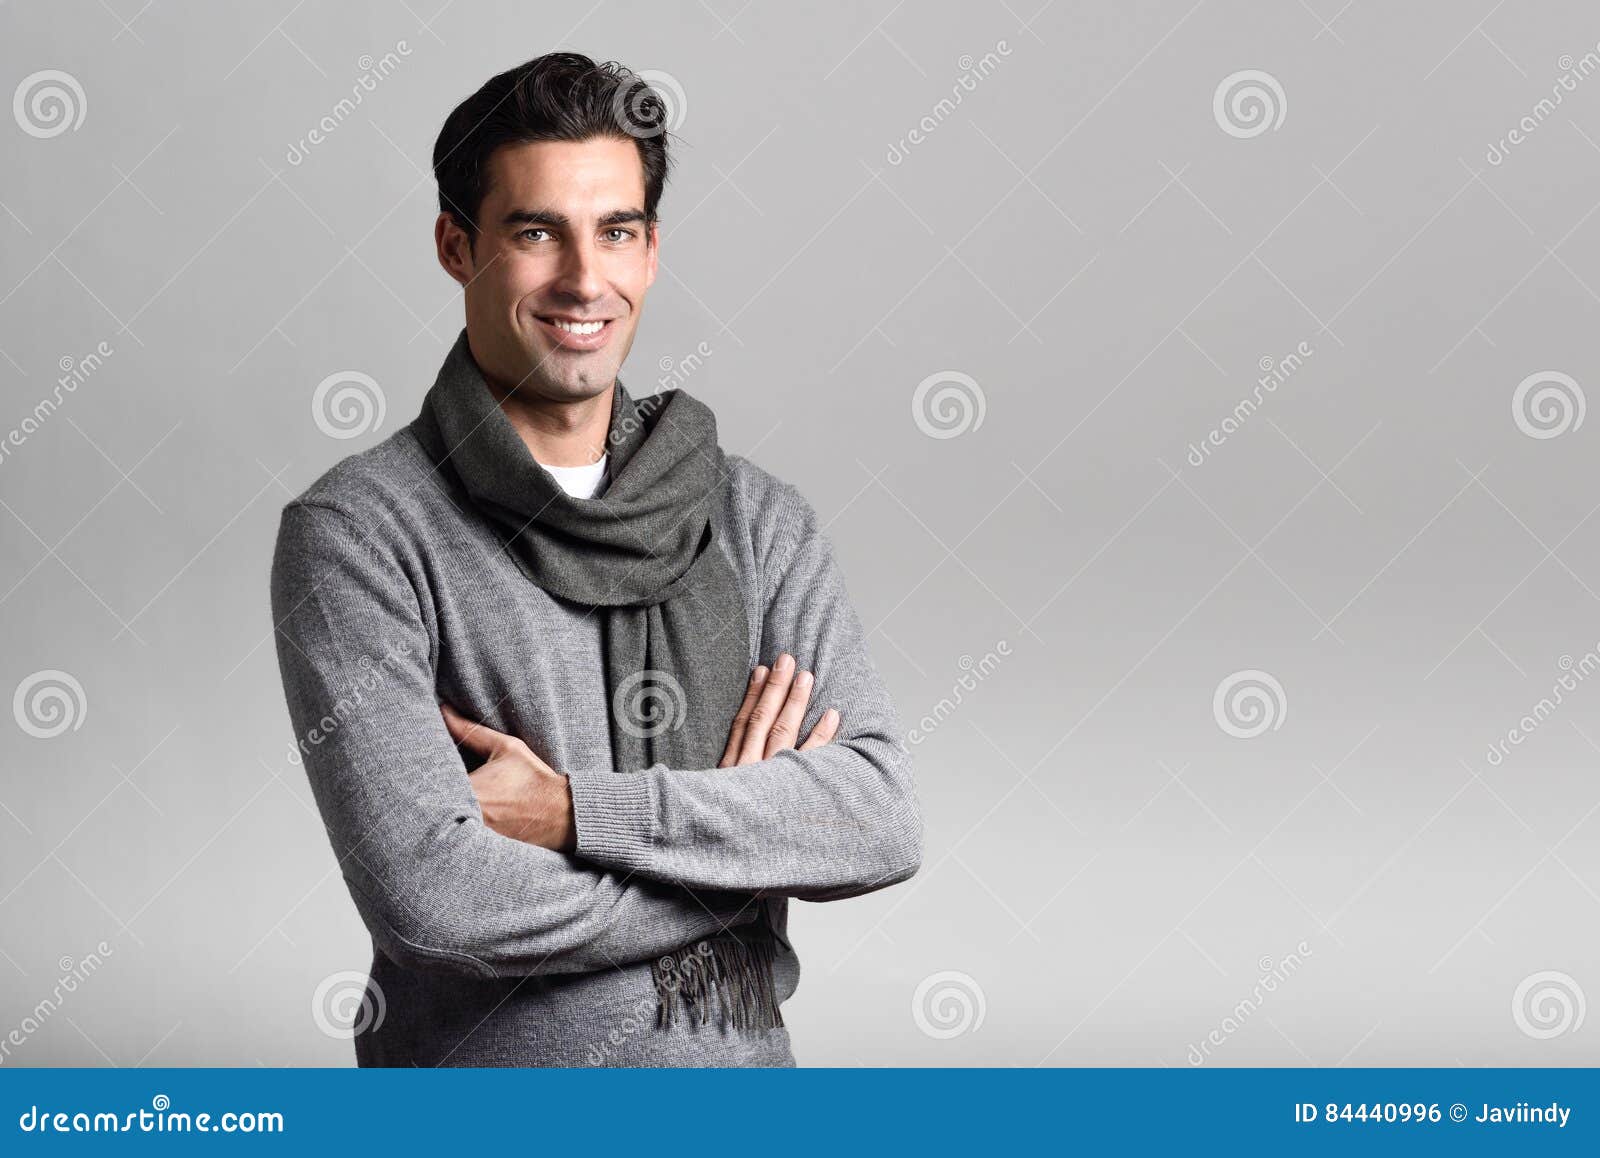 Handsome Man Wearing Winter Clothes On White Background Stock Photo ...